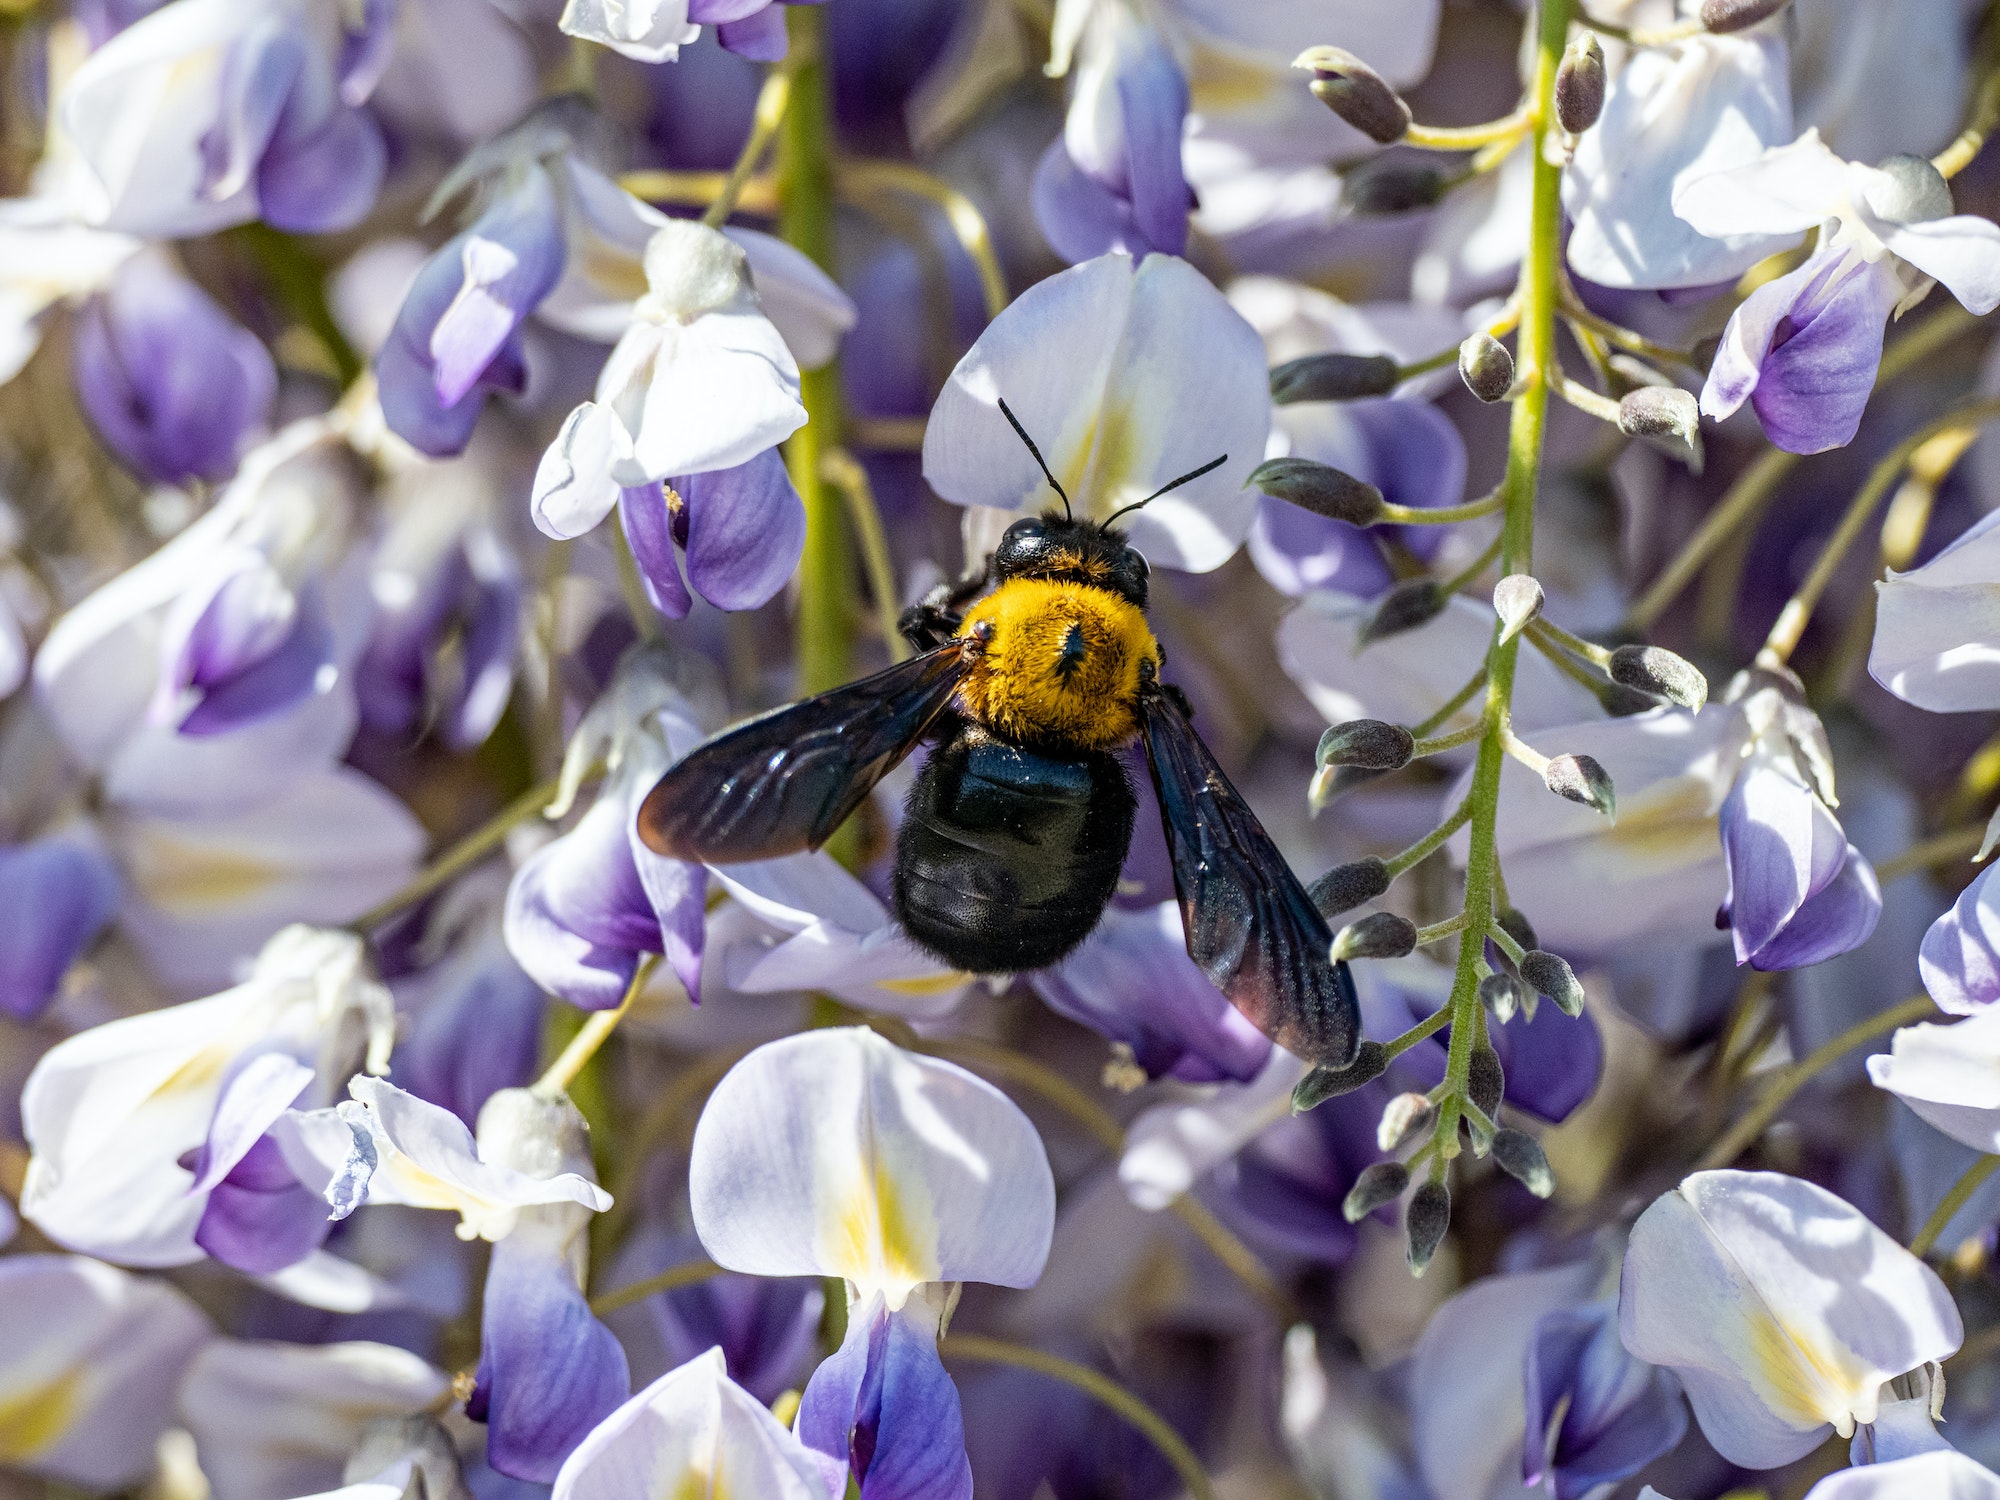 Selective focus shot of a Japanese carpenter bee collecting pollen on a purple flower